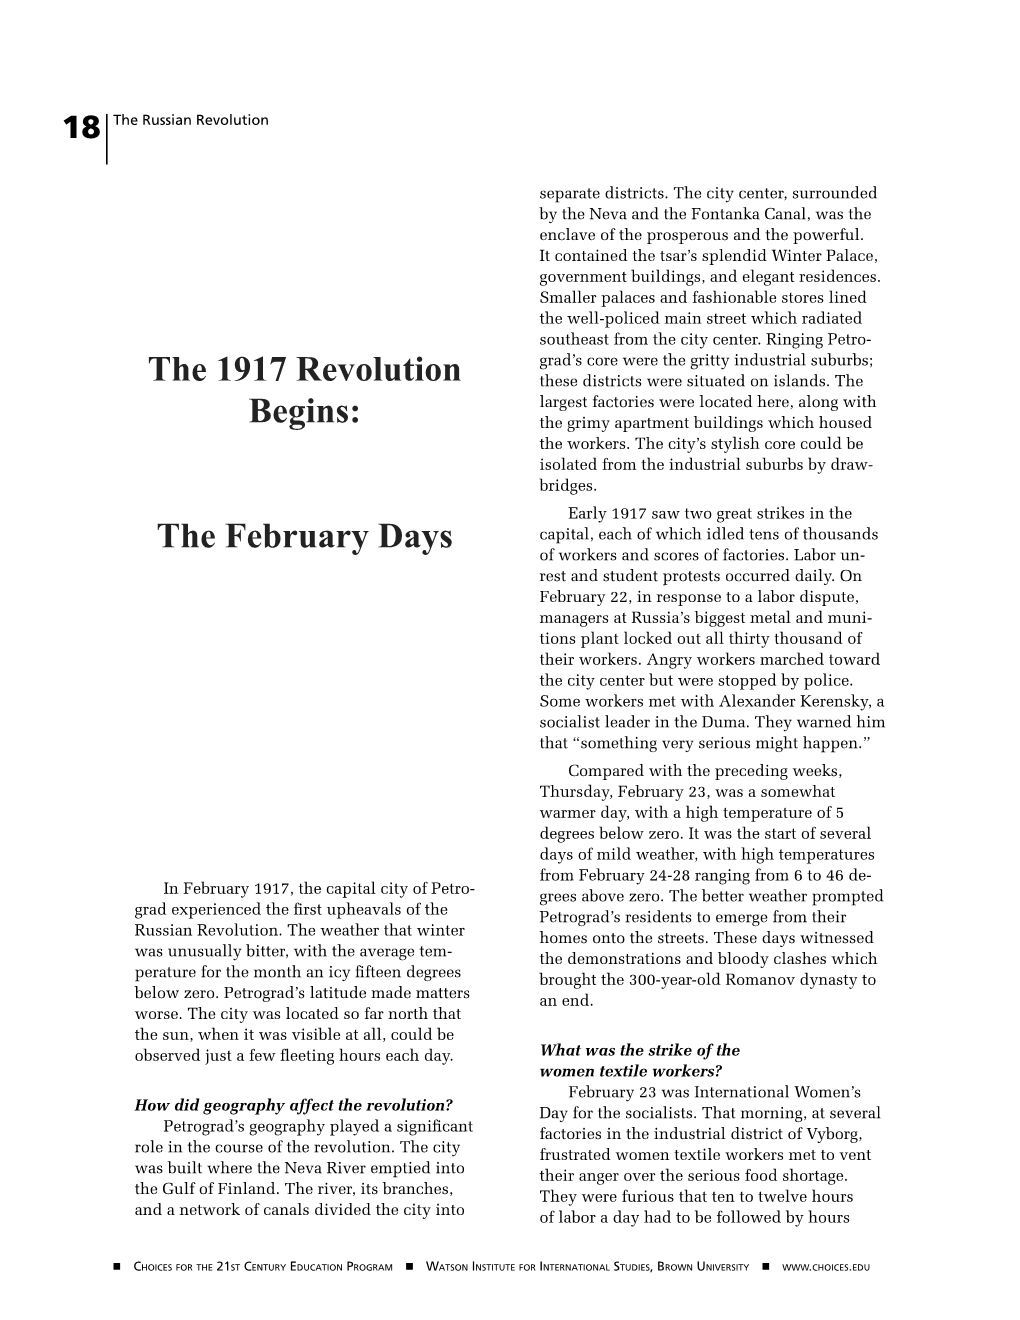 The 1917 Revolution Begins: the February Days